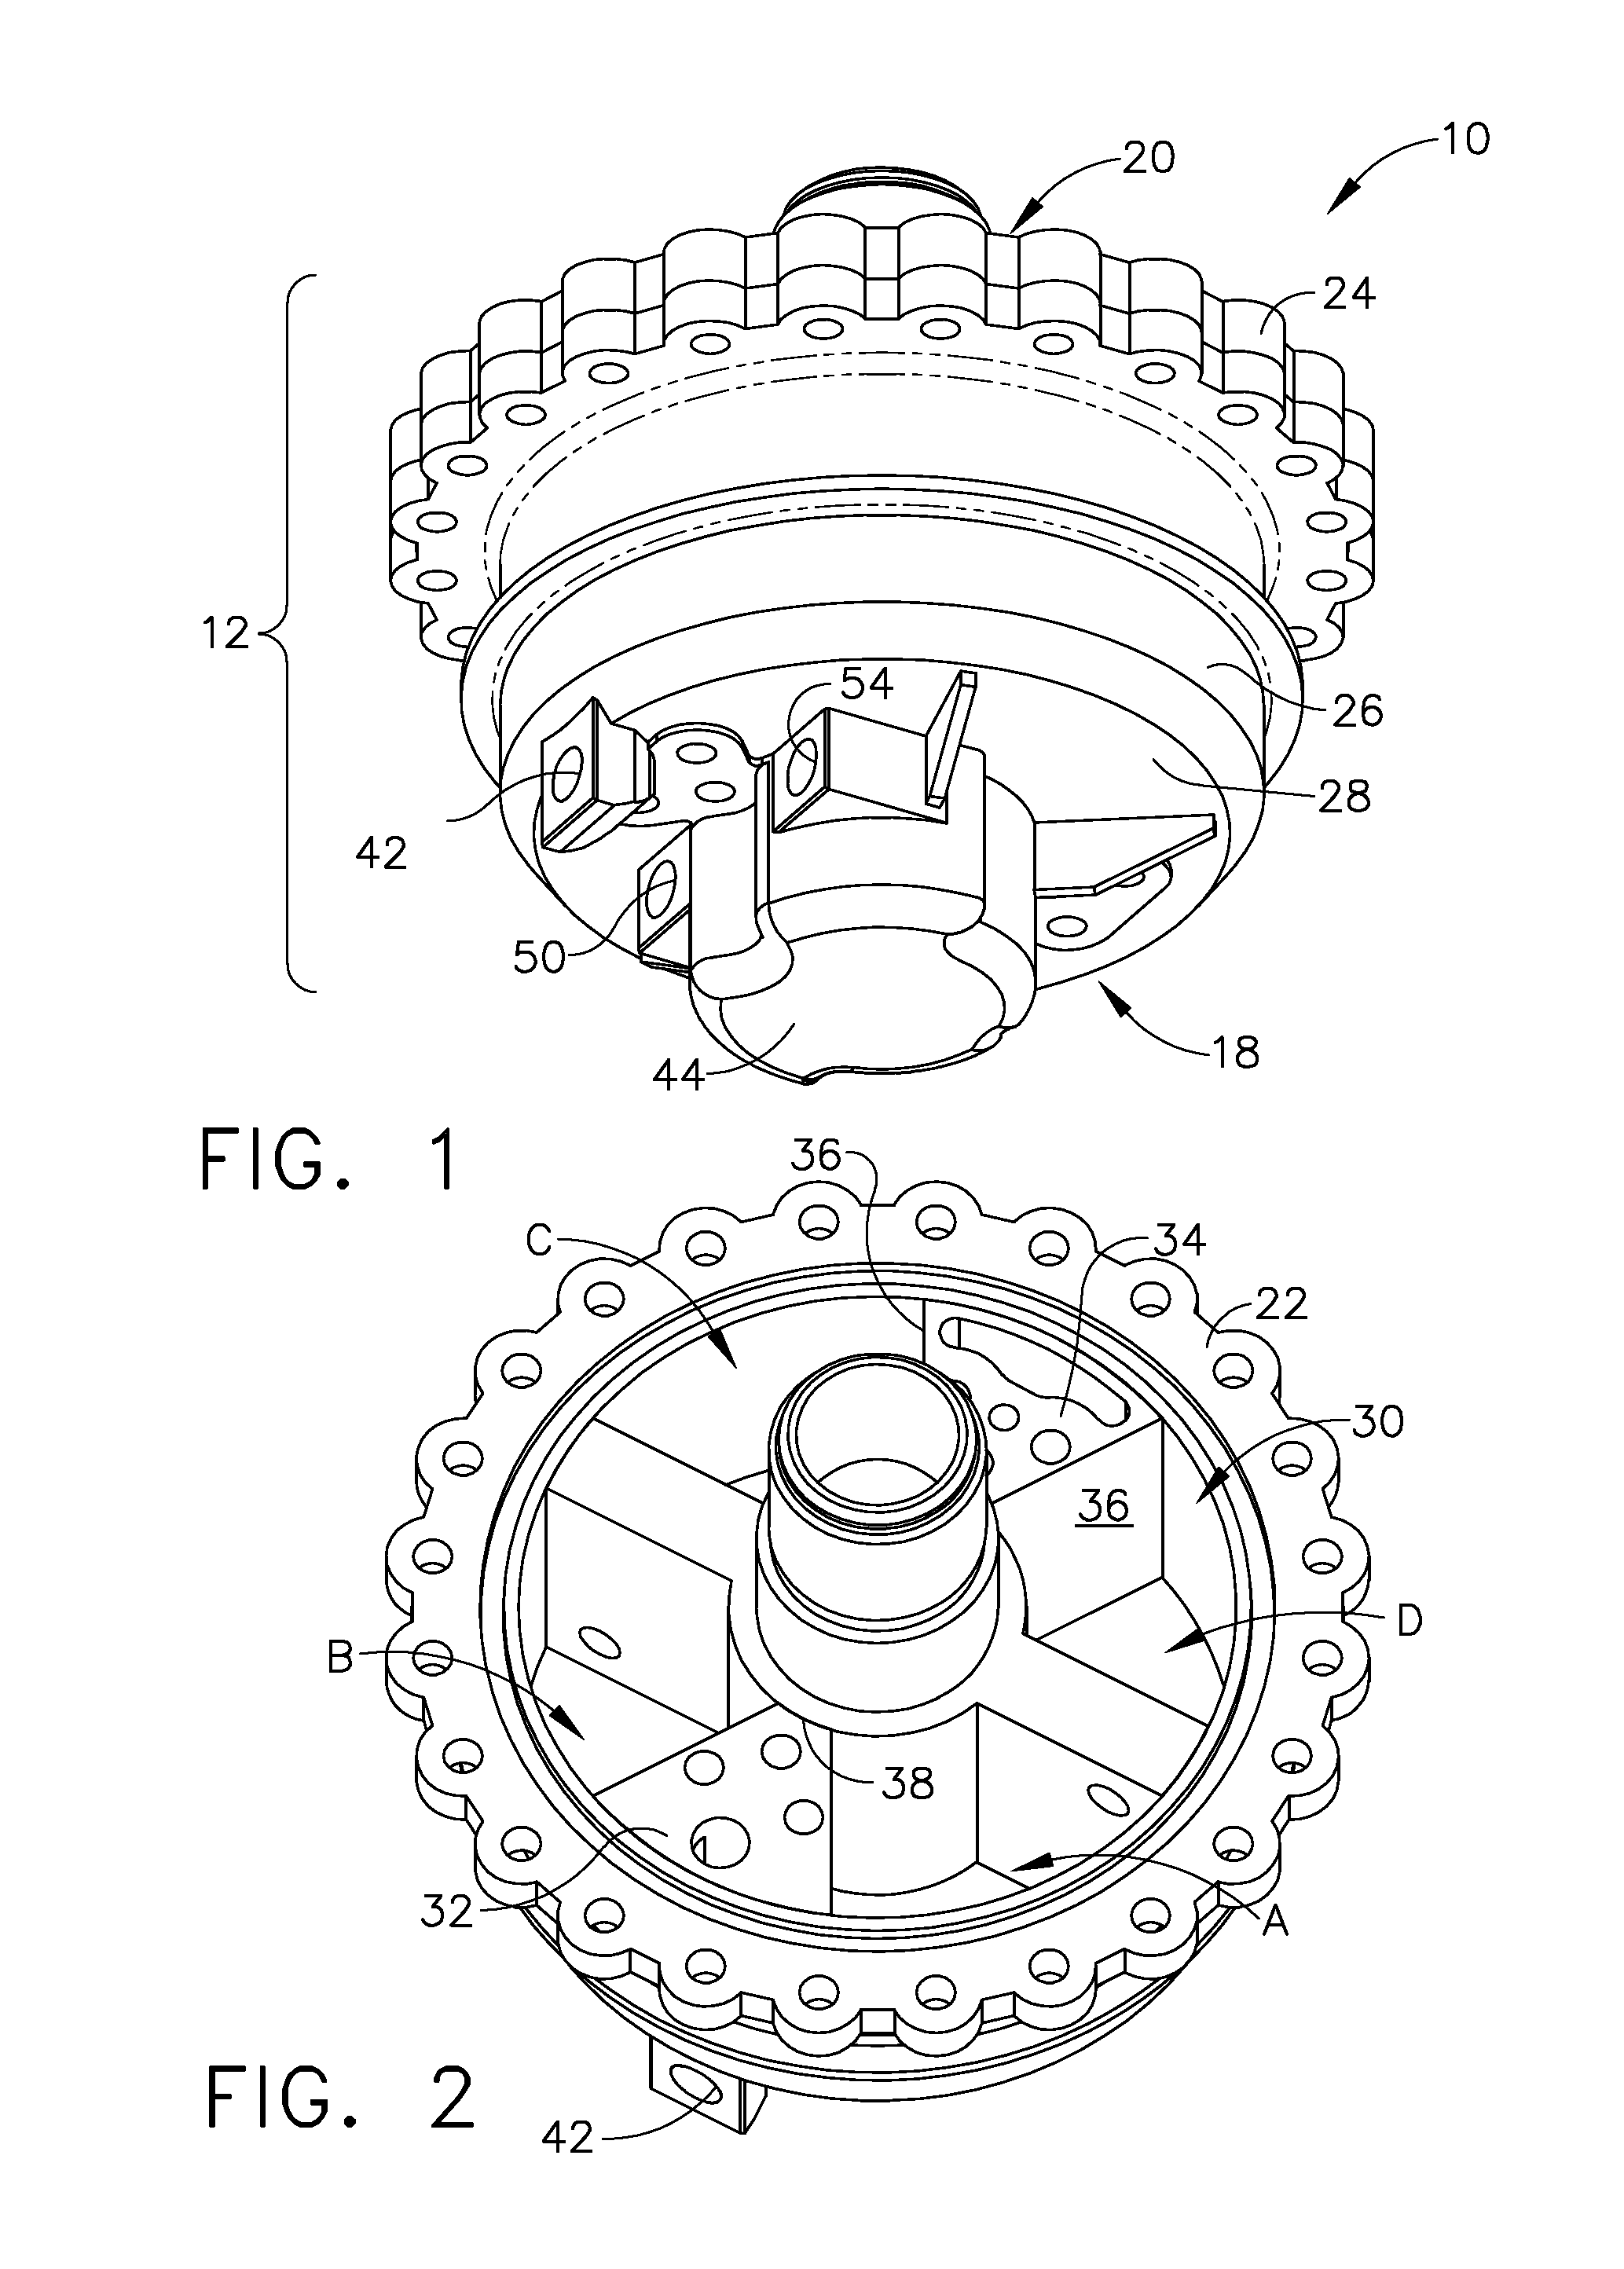 Rotary hydraulic actuator with hydraulically controlled position limits